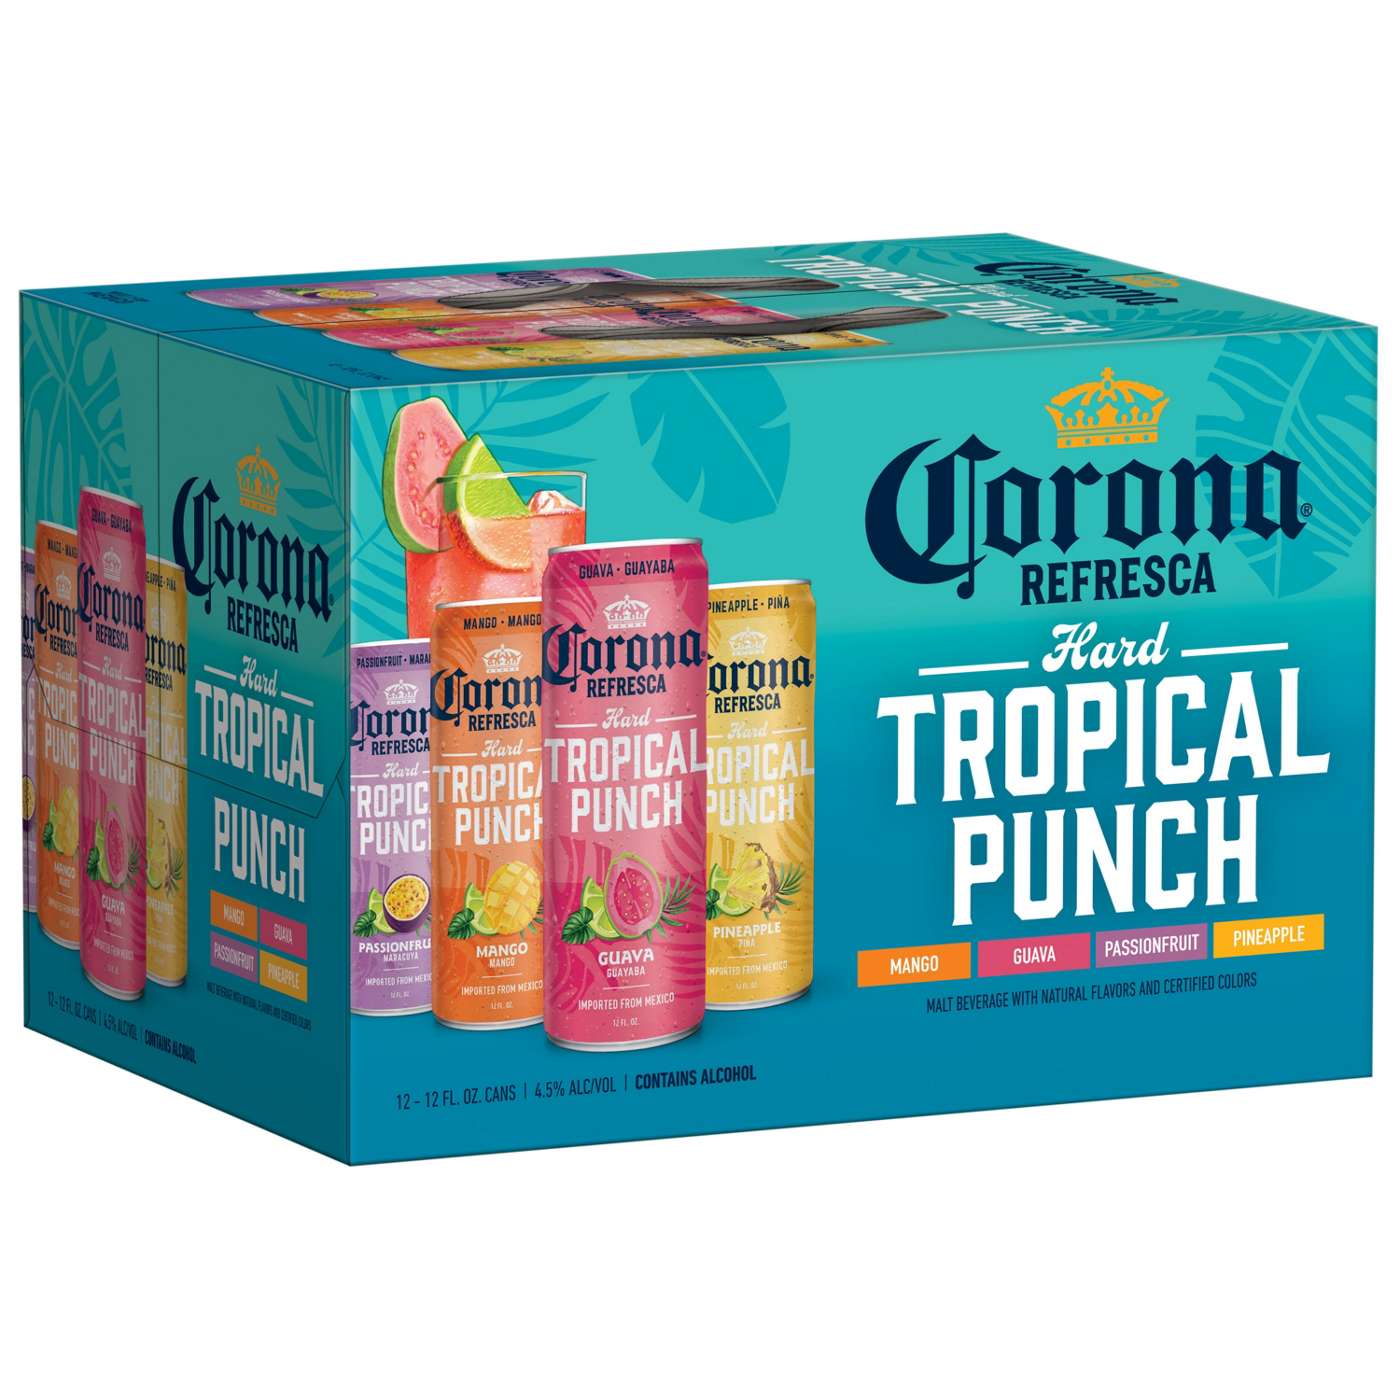 Corona Refresca Hard Tropical Punch Variety Pack 12 oz Cans, 12 pk; image 1 of 10